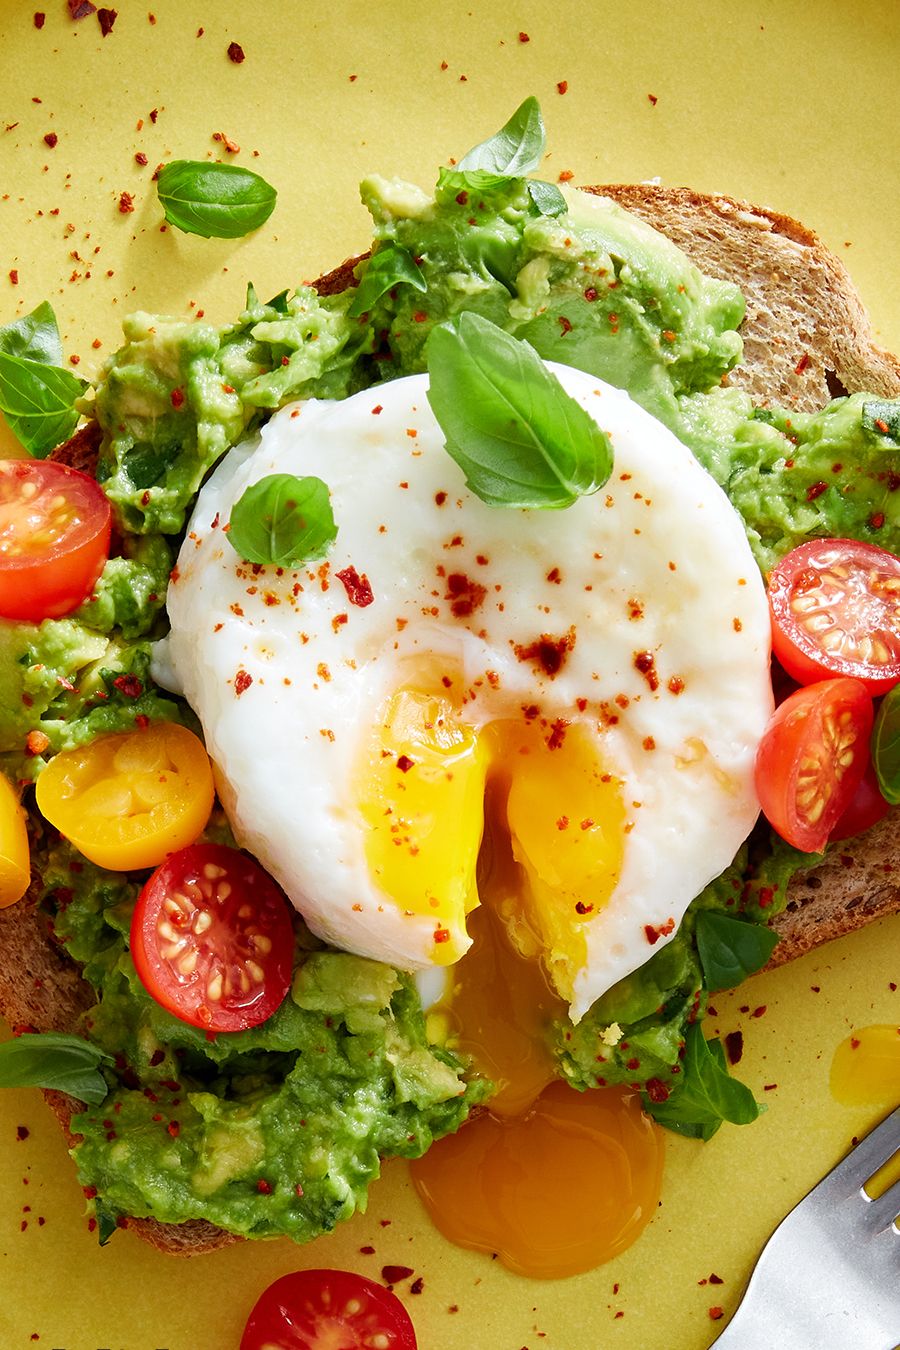 https://hips.hearstapps.com/hmg-prod/images/air-fryer-poached-egg-avocado-toastpin-1653484893.jpg?crop=1xw:0.9453781512605042xh;center,top&resize=980:*